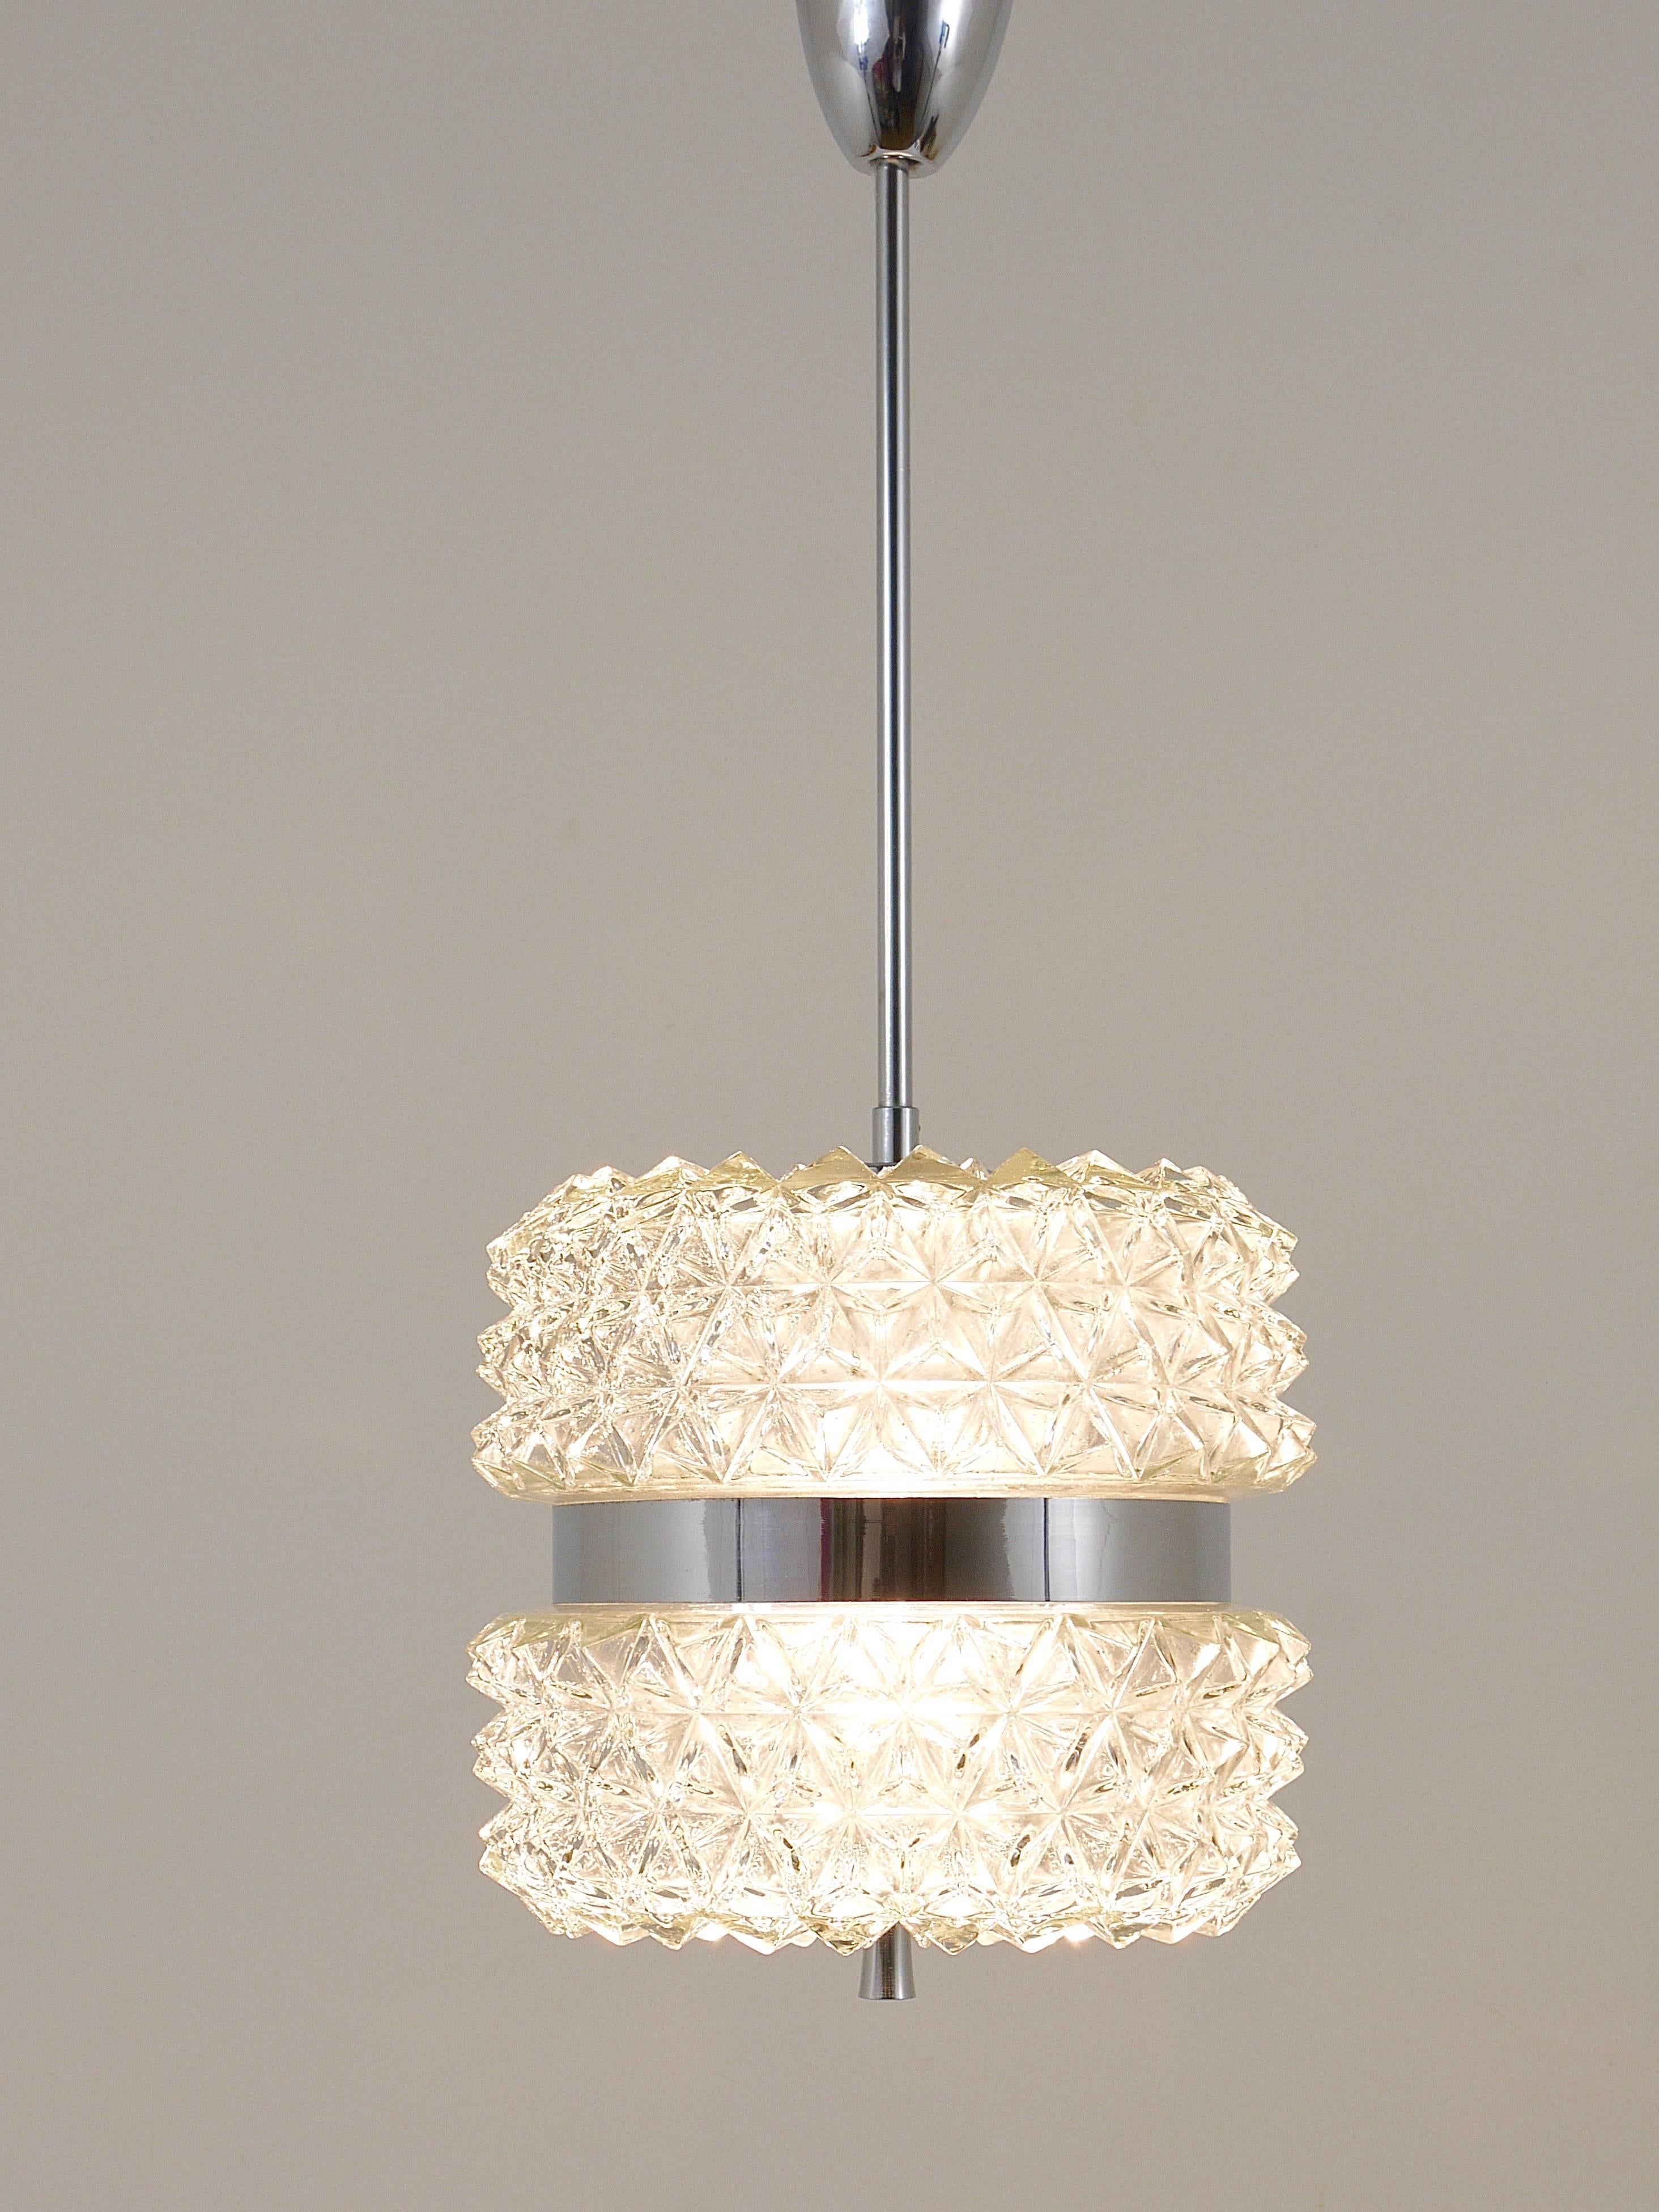 A beautiful pendant lamp featuring a faceted glass lampshade and chrome-plated hardware, originating from the 1960s. This piece embodies the distinctive style reminiscent of Carl Fagerlund, renowned for his designs at Orrefors, Sweden. Remarkably